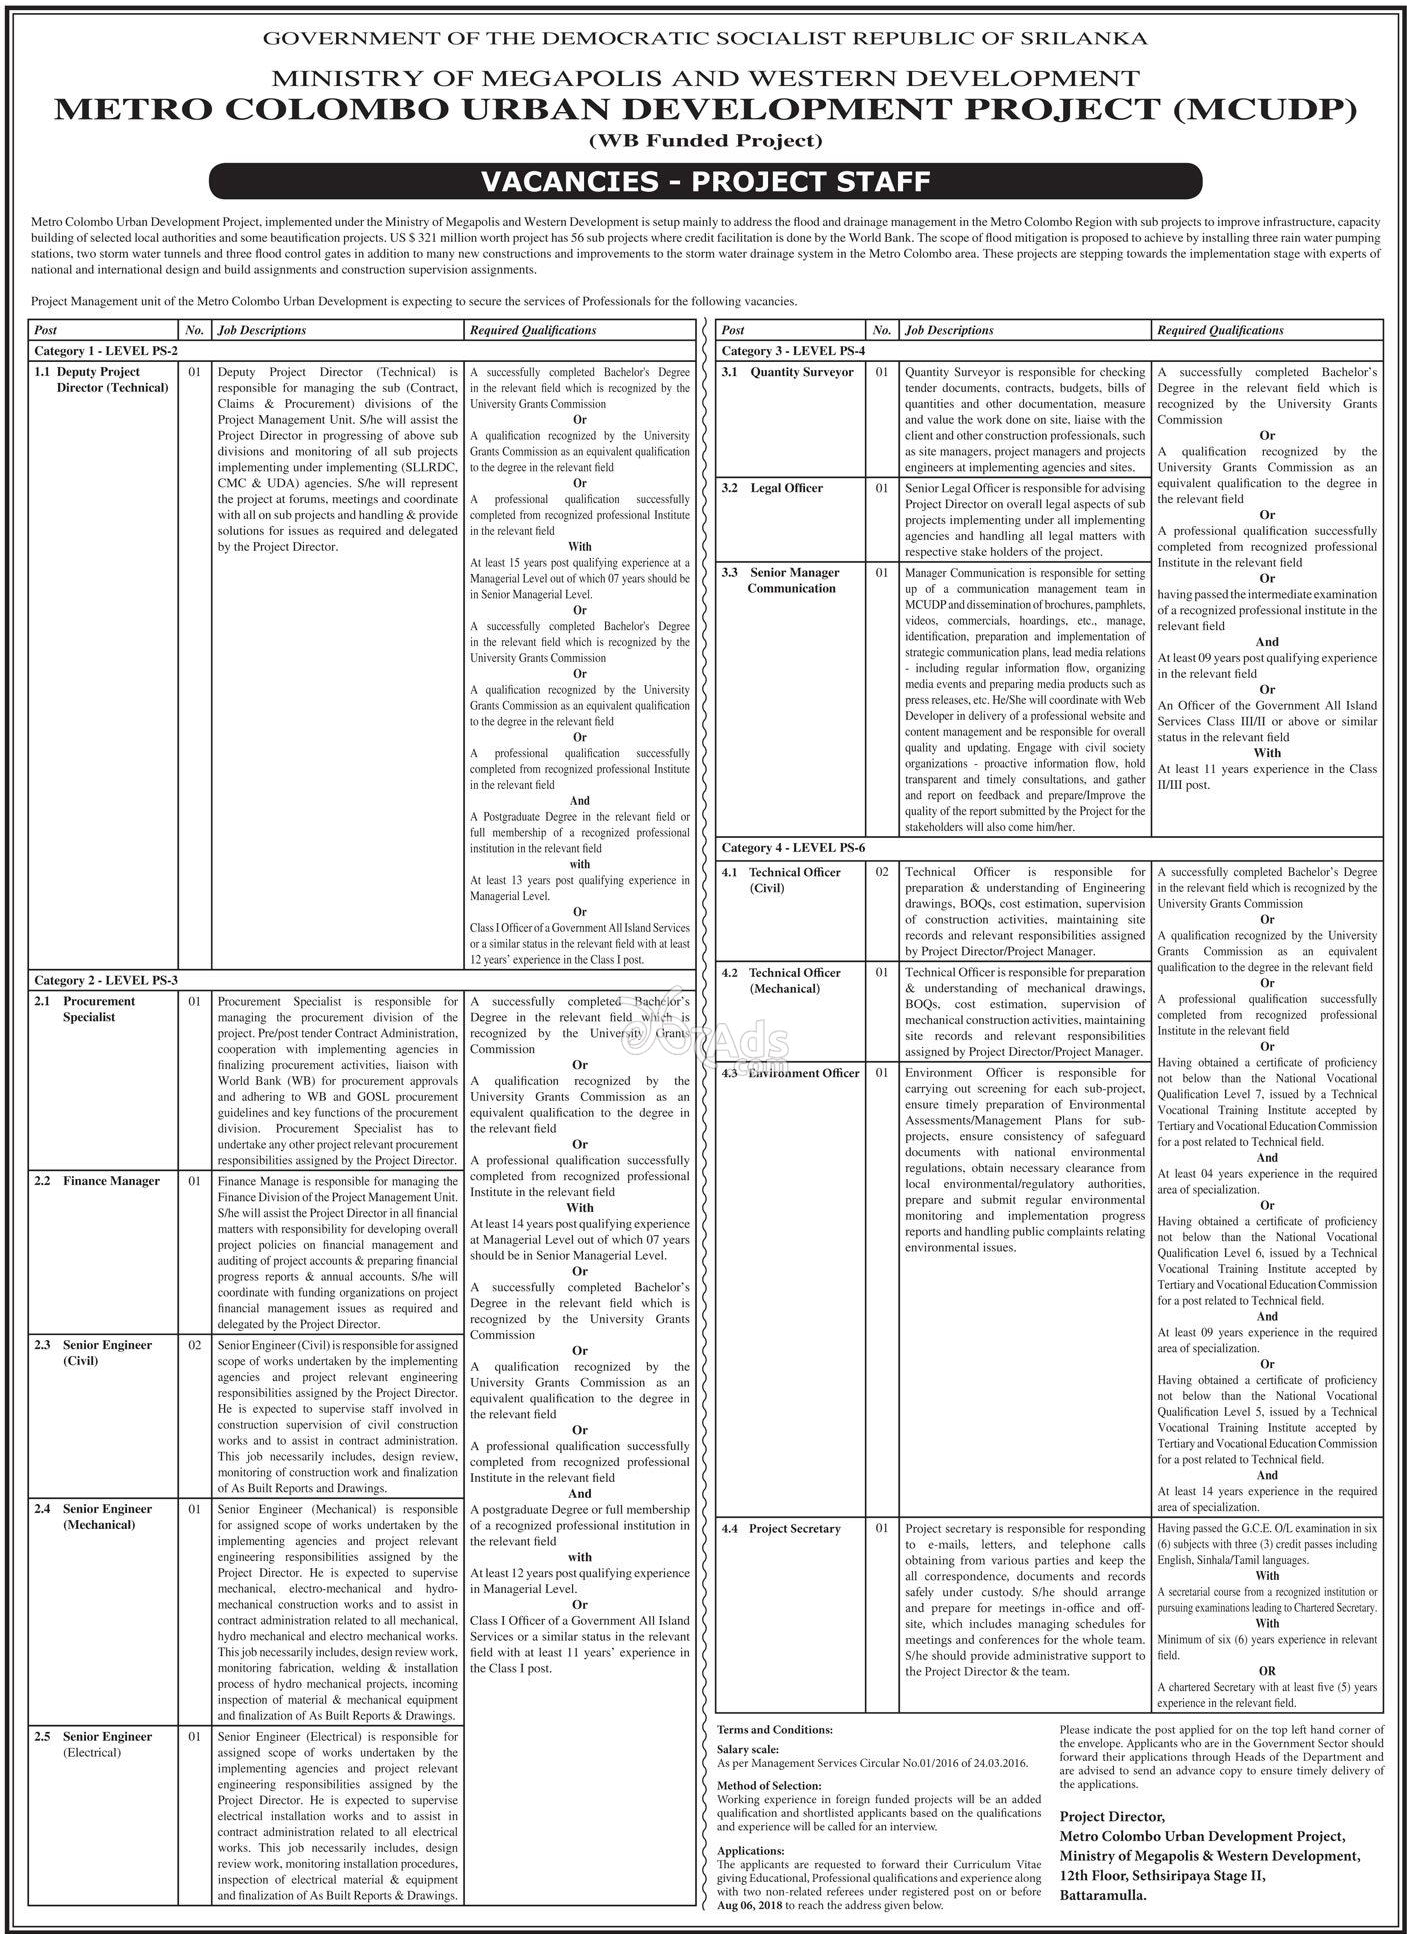 Technical Officer / Environment Officer / Project Secretary - Ministry of Megapolis Jobs Vacancies